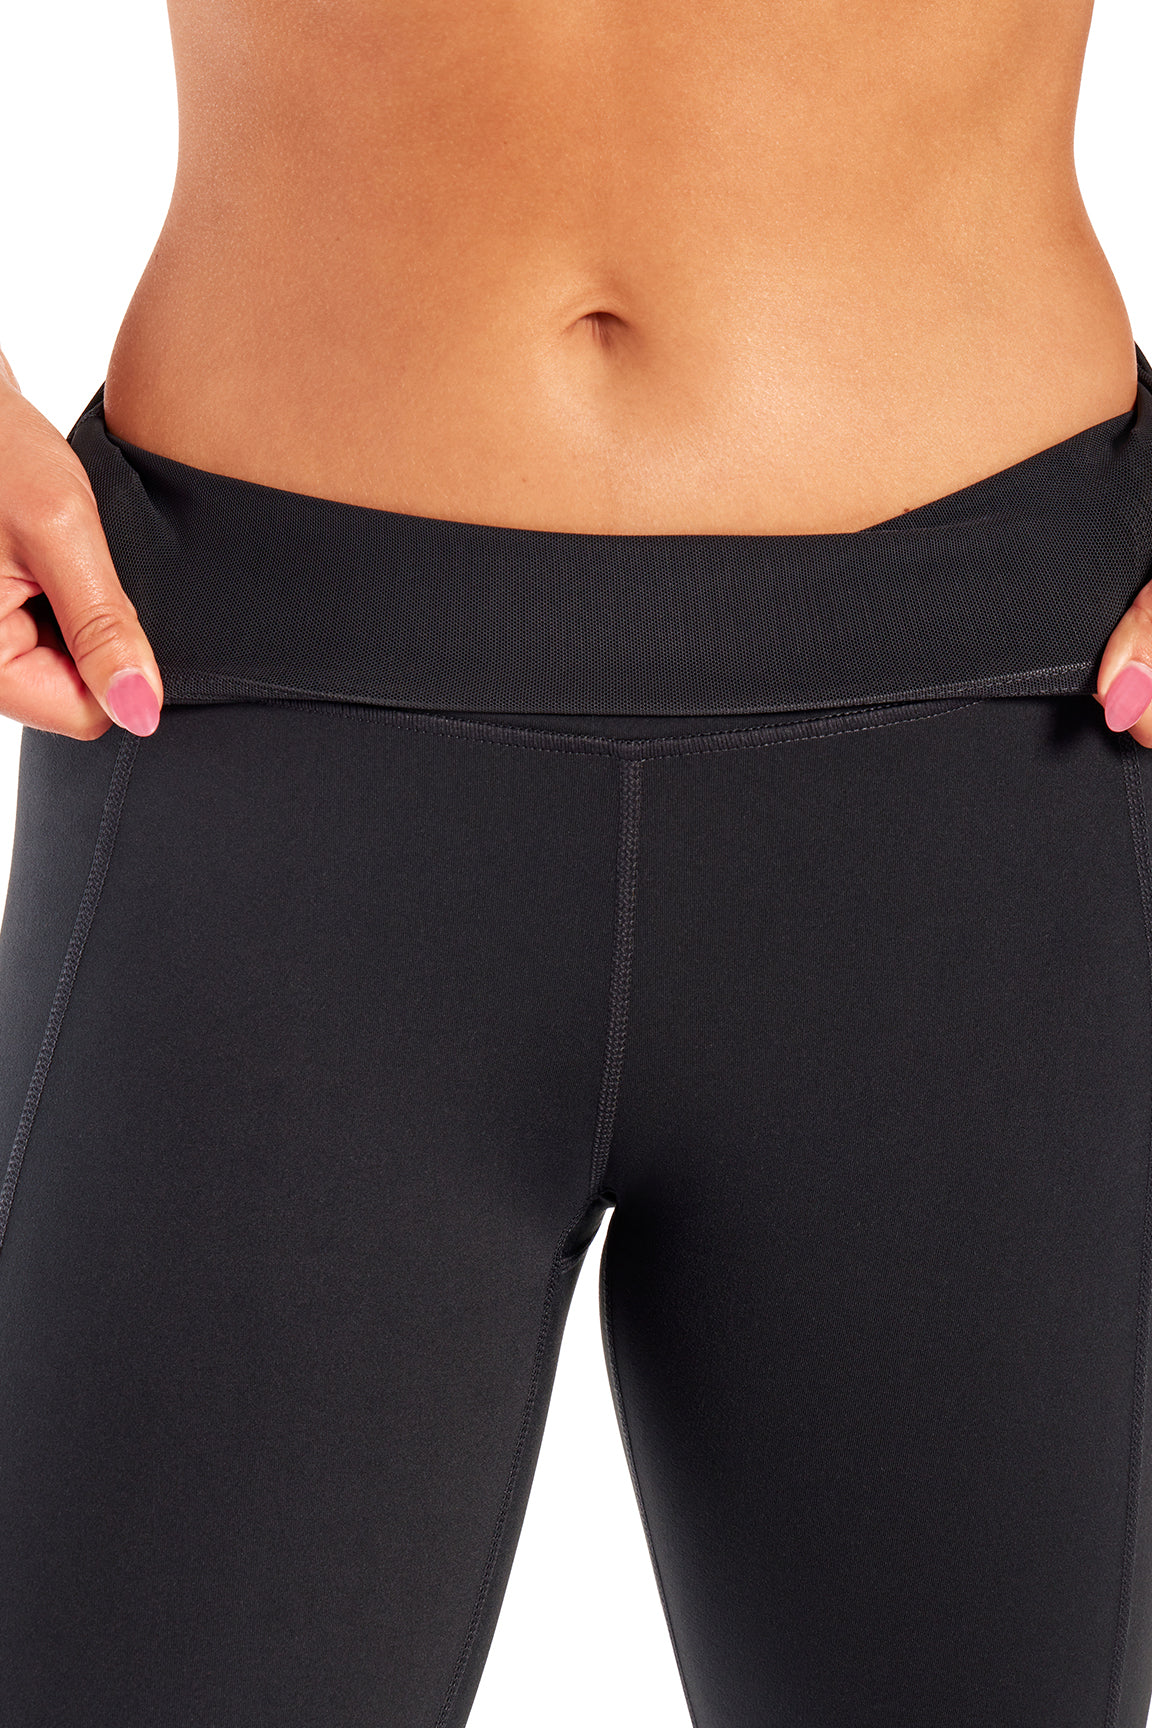 Lululemon Black High Rise Compression Leggings Mesh Sides Womens Size 4-6 -  $27 - From Taylor